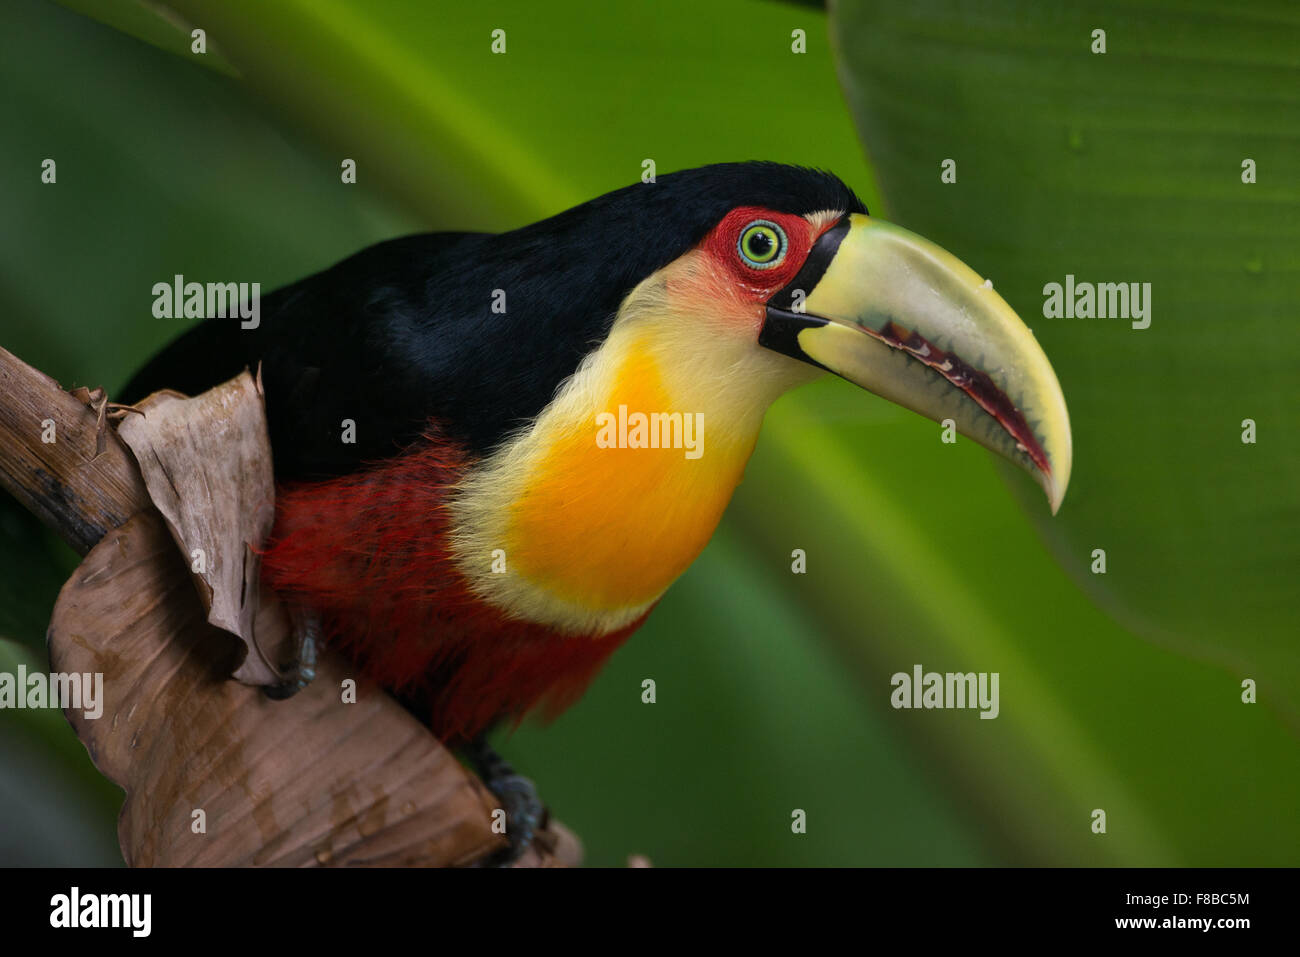 A Red-breasted Toucan from the Atlantic Rainforest Stock Photo